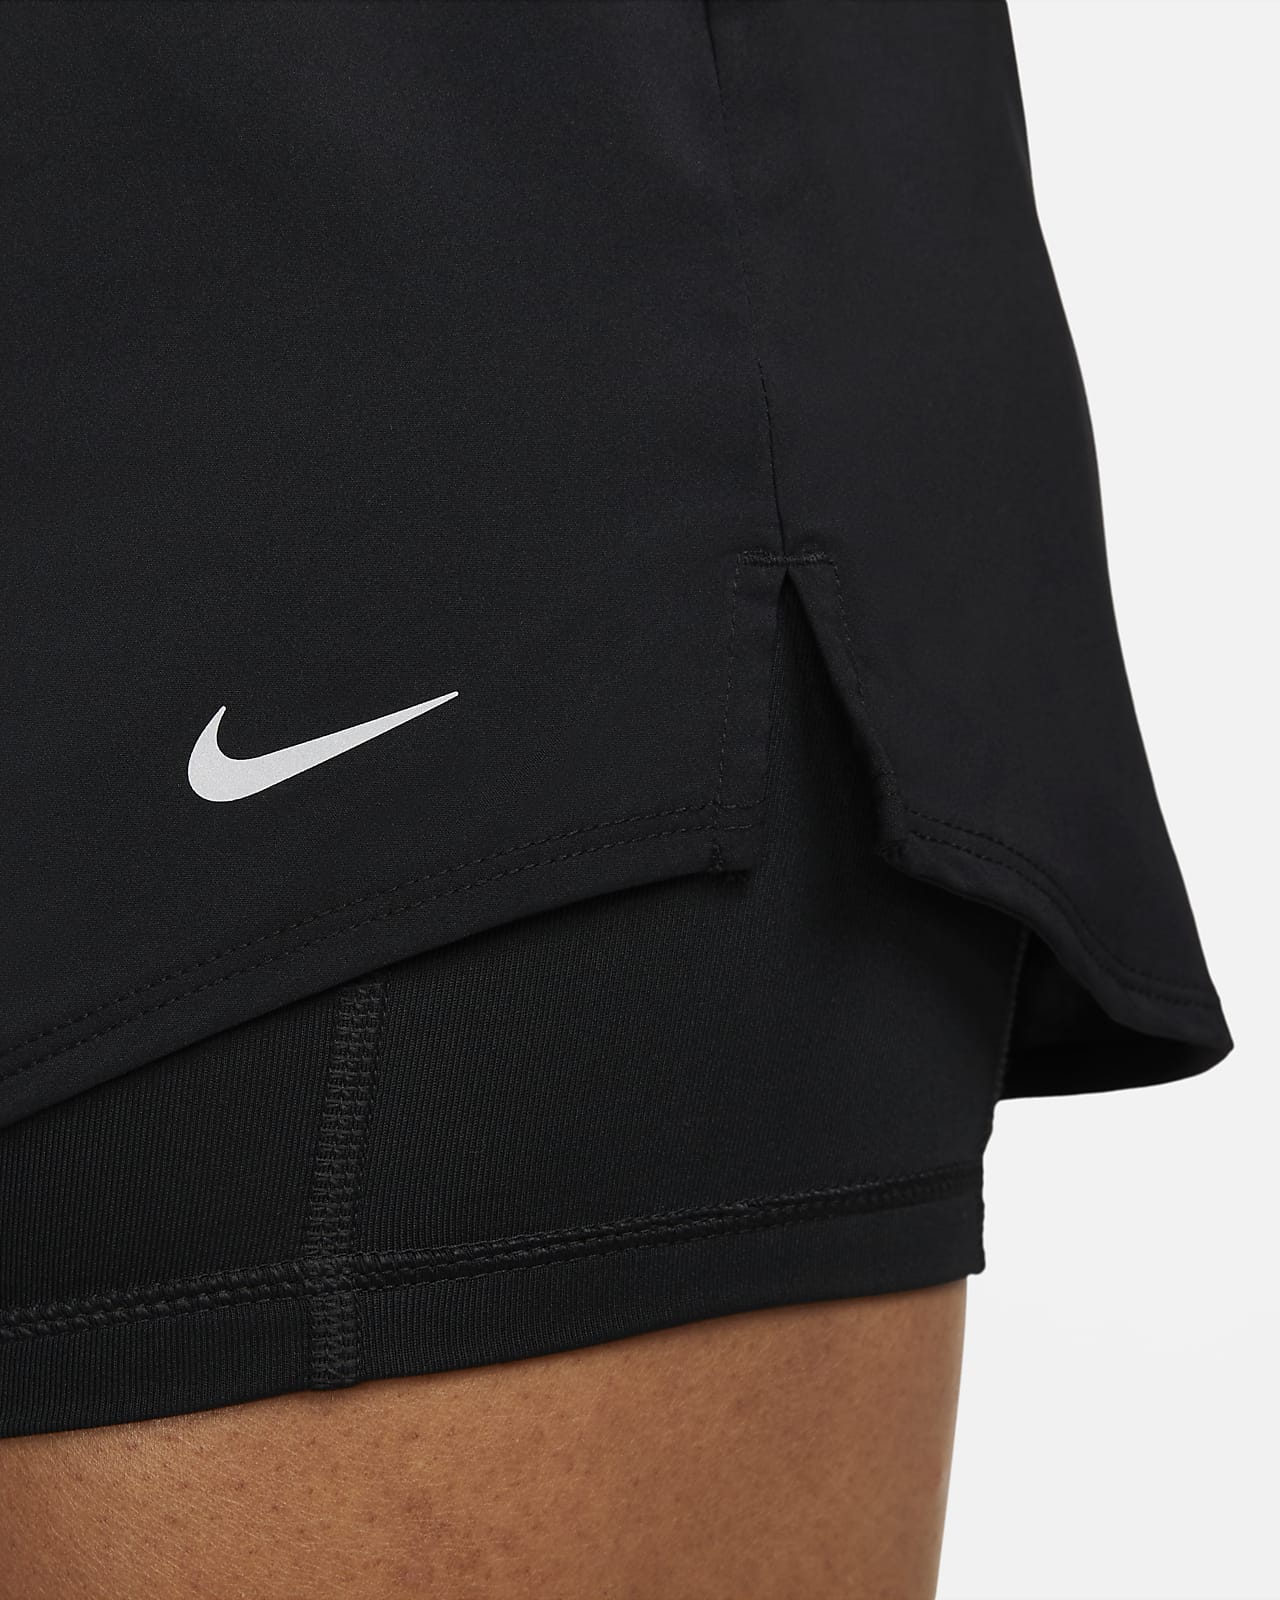 Nike One Women's Dri-FIT Mid-Rise 8cm (approx.) 2-in-1 Shorts. Nike NO